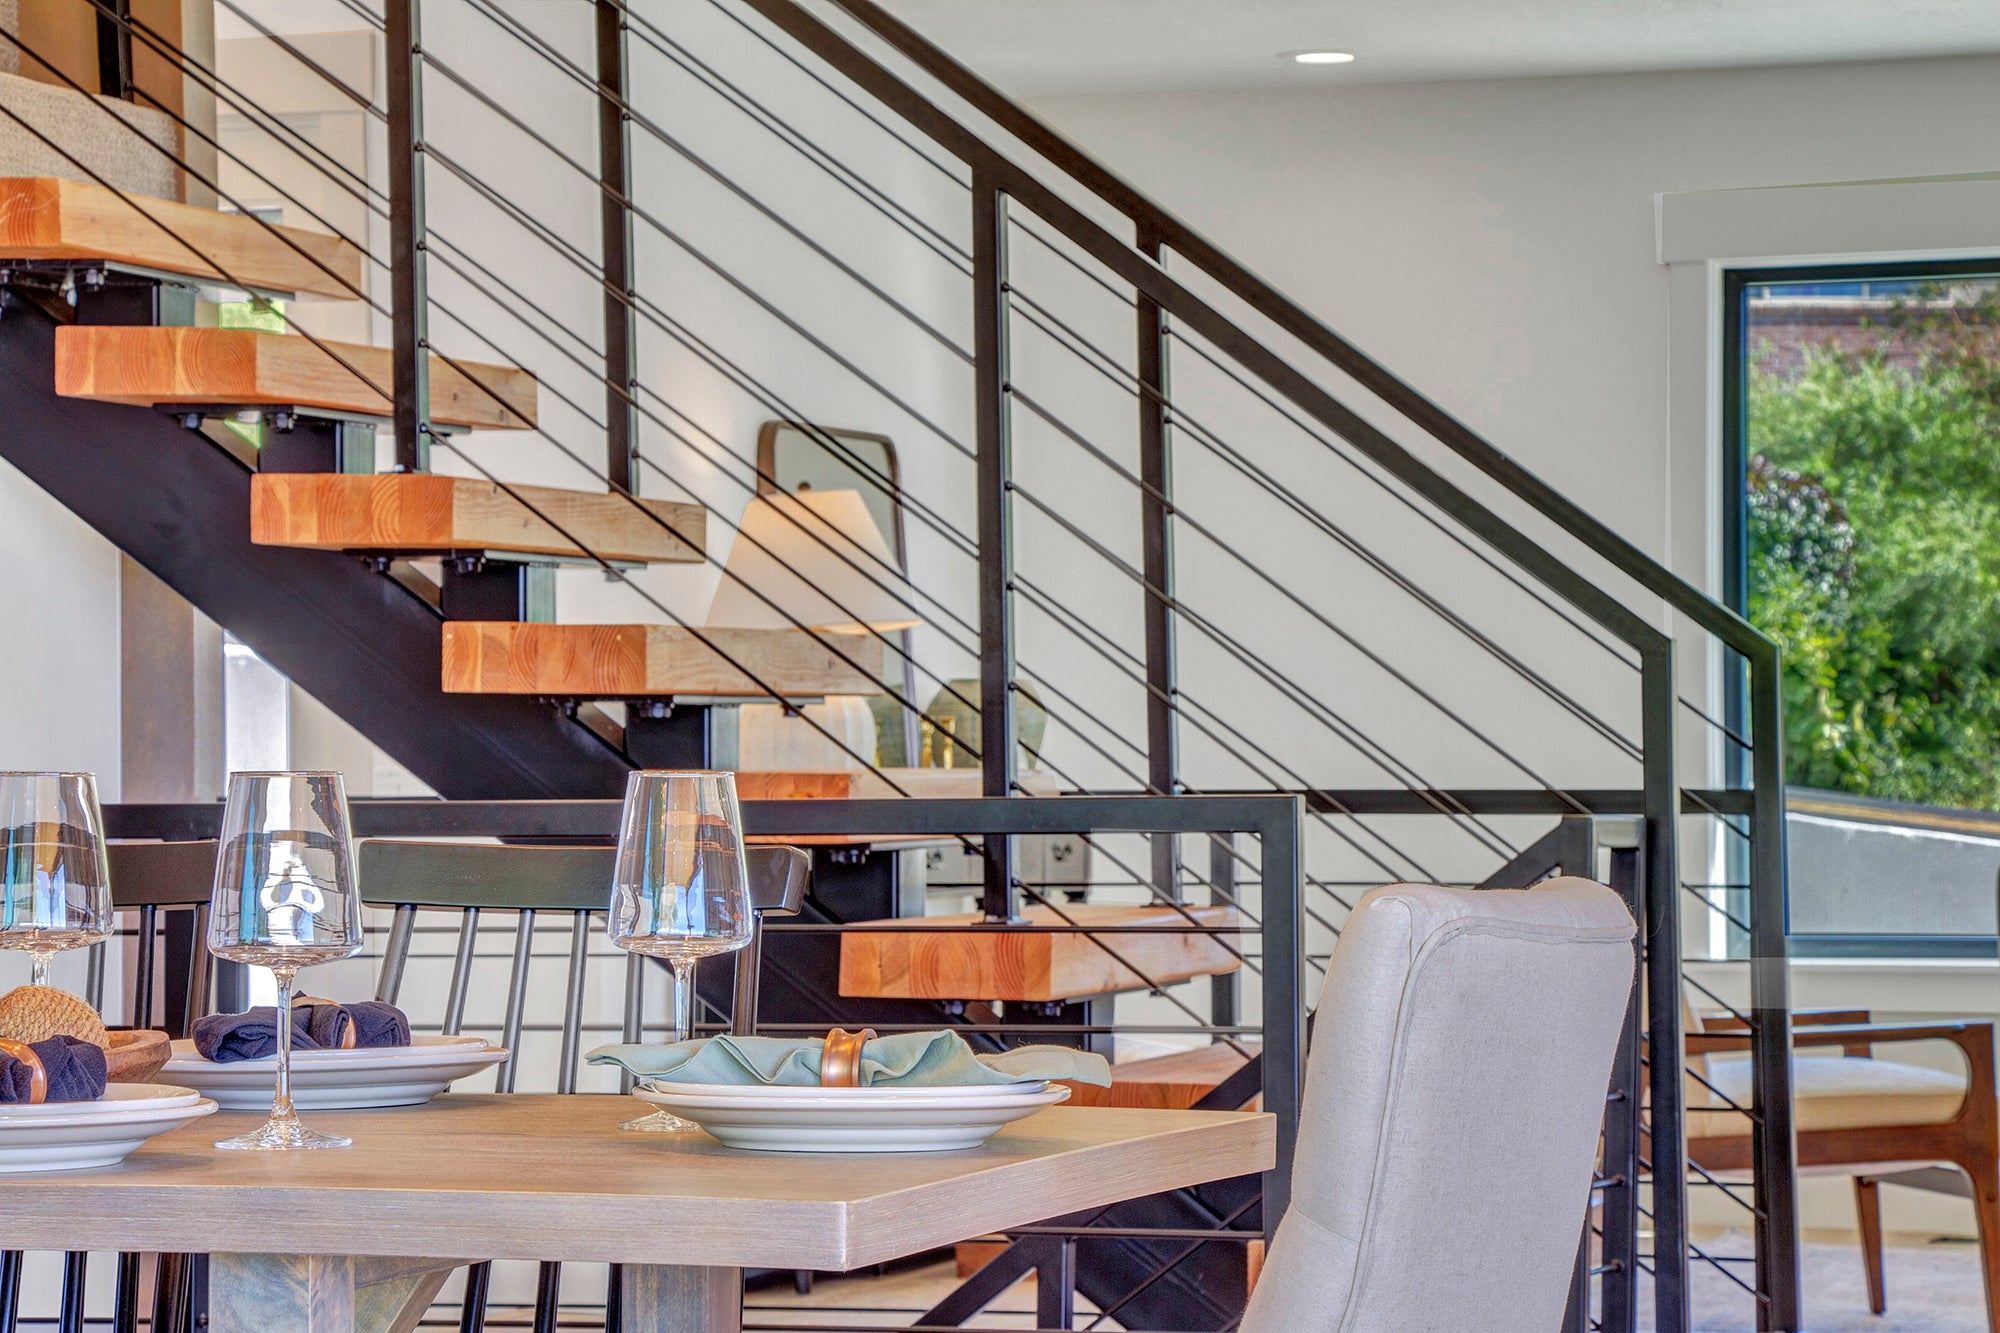 A modern dining area with a wooden table set with wine glasses and plates, adjacent to a sleek staircase with wooden steps and a black metal railing, all bathed in natural light from large windows.